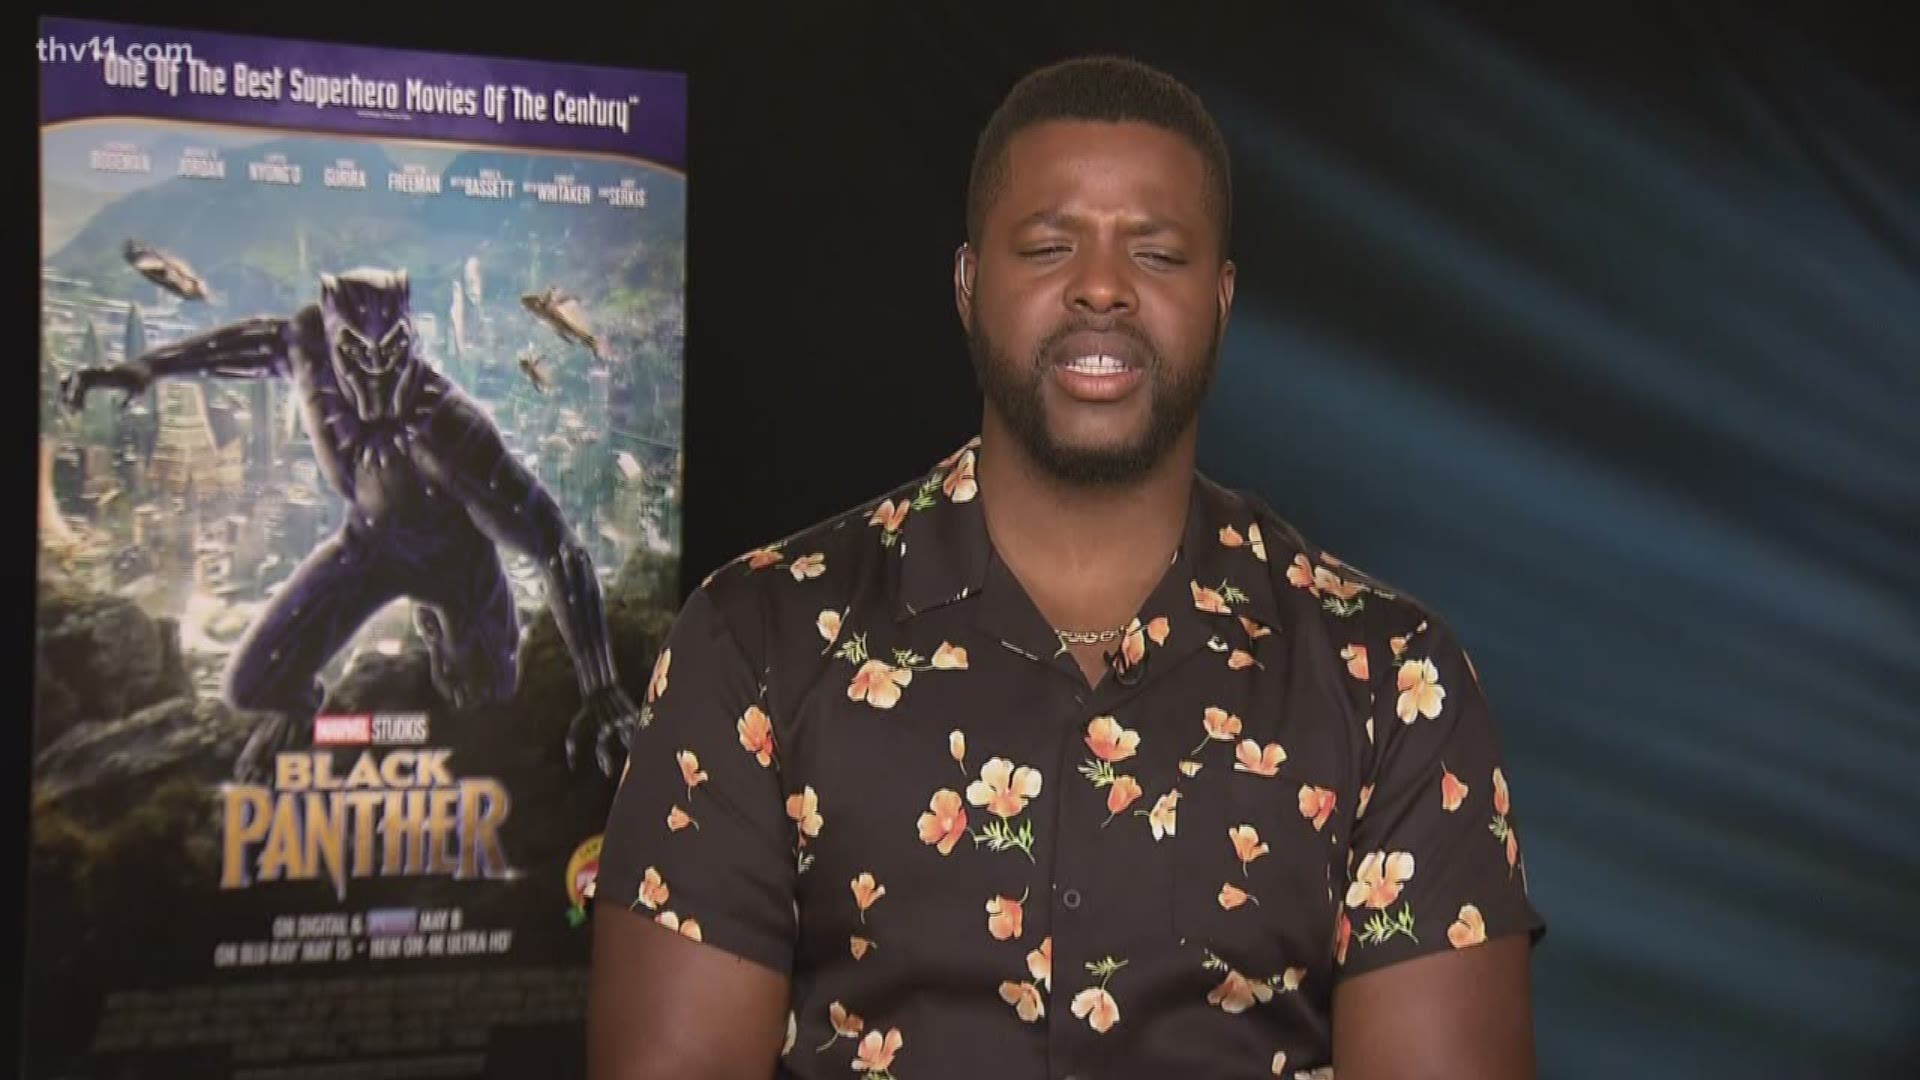 As part of his film review, Jonathan Nettles asked a few questions of a "Black Panther" actor.